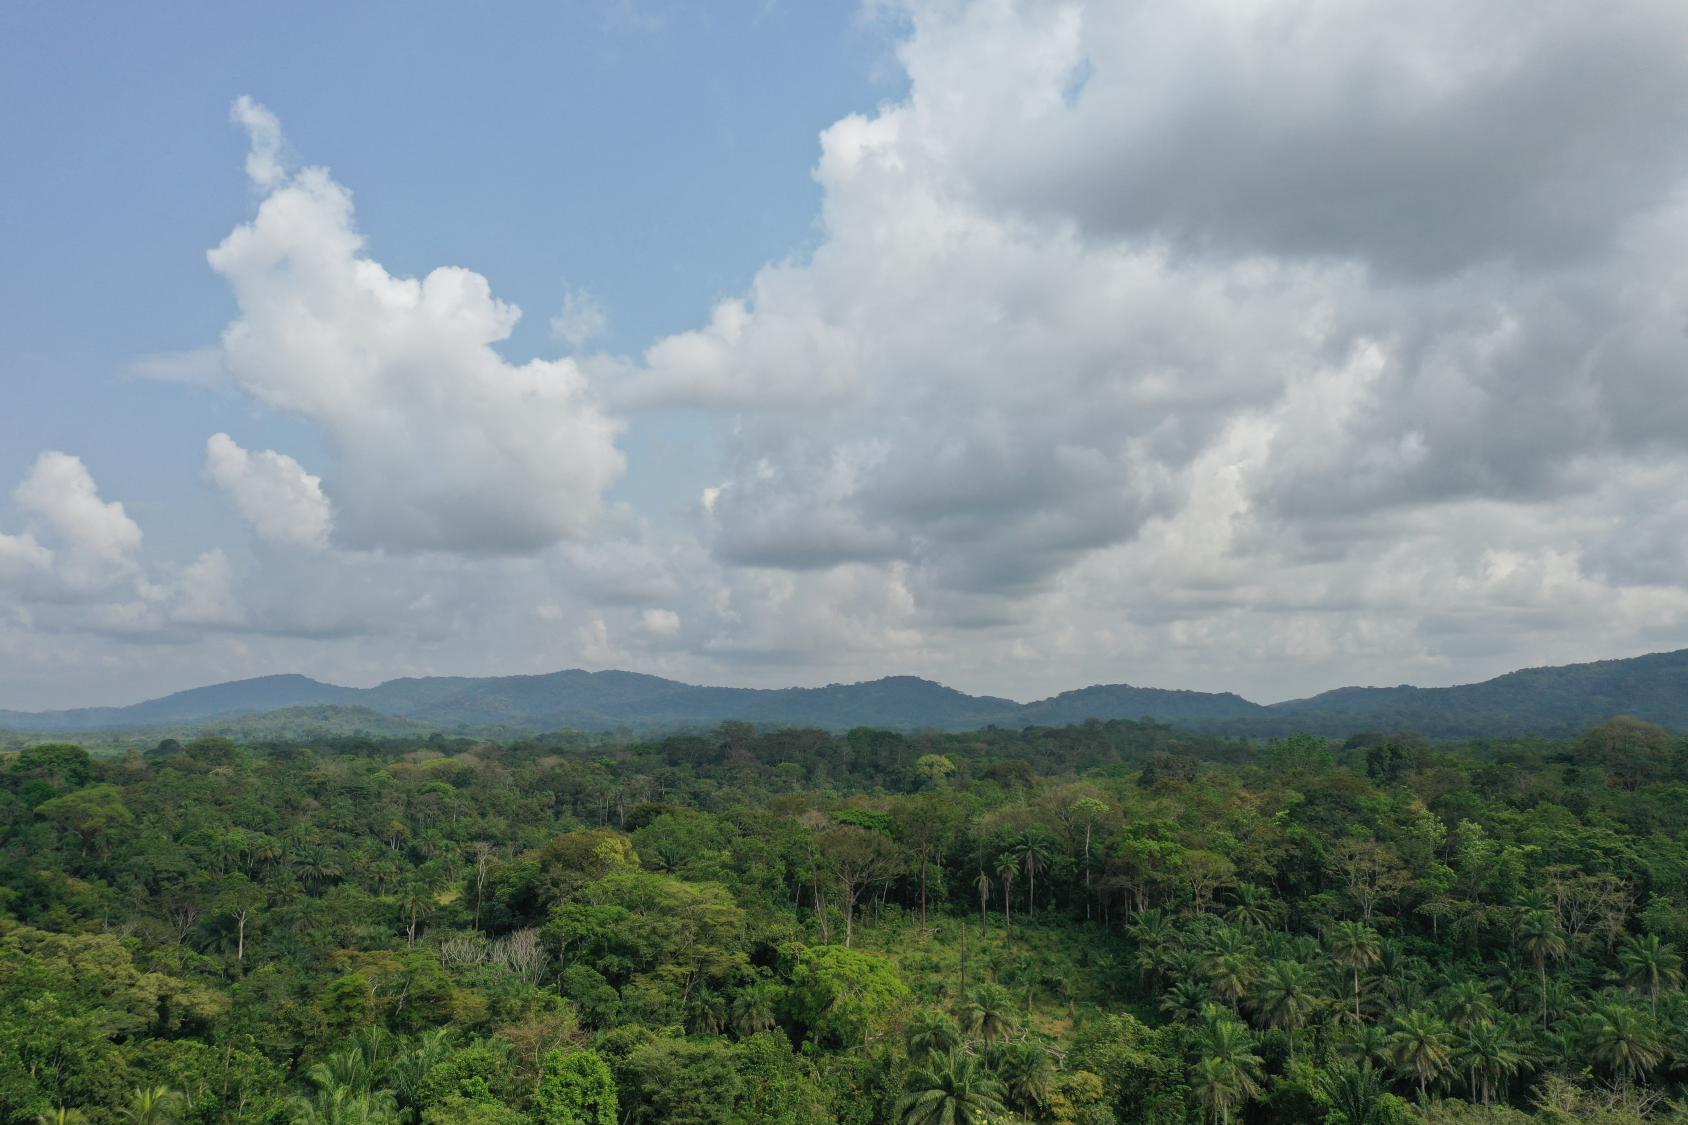 Fears abound that the beautiful greenery of the peninsular area around Freetown may soon disappear due to urbanization, firewood and charcoal production, quarrying and other effects.